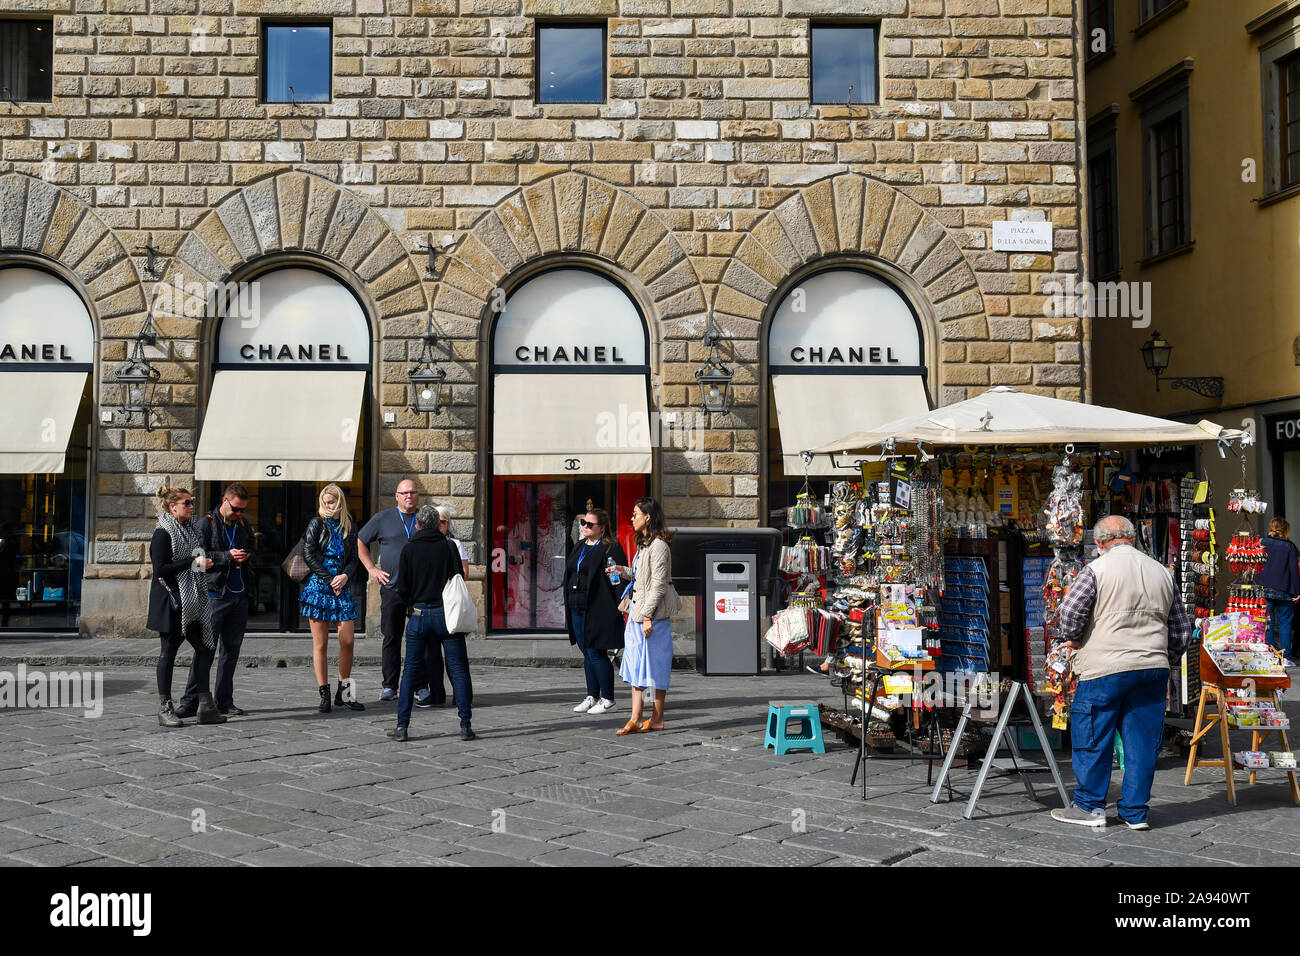 Souvenir stall with street vendor in front of the Chanel fashion boutique in Signoria Square in the historic centre of Florence, Tuscany, Italy Stock Photo